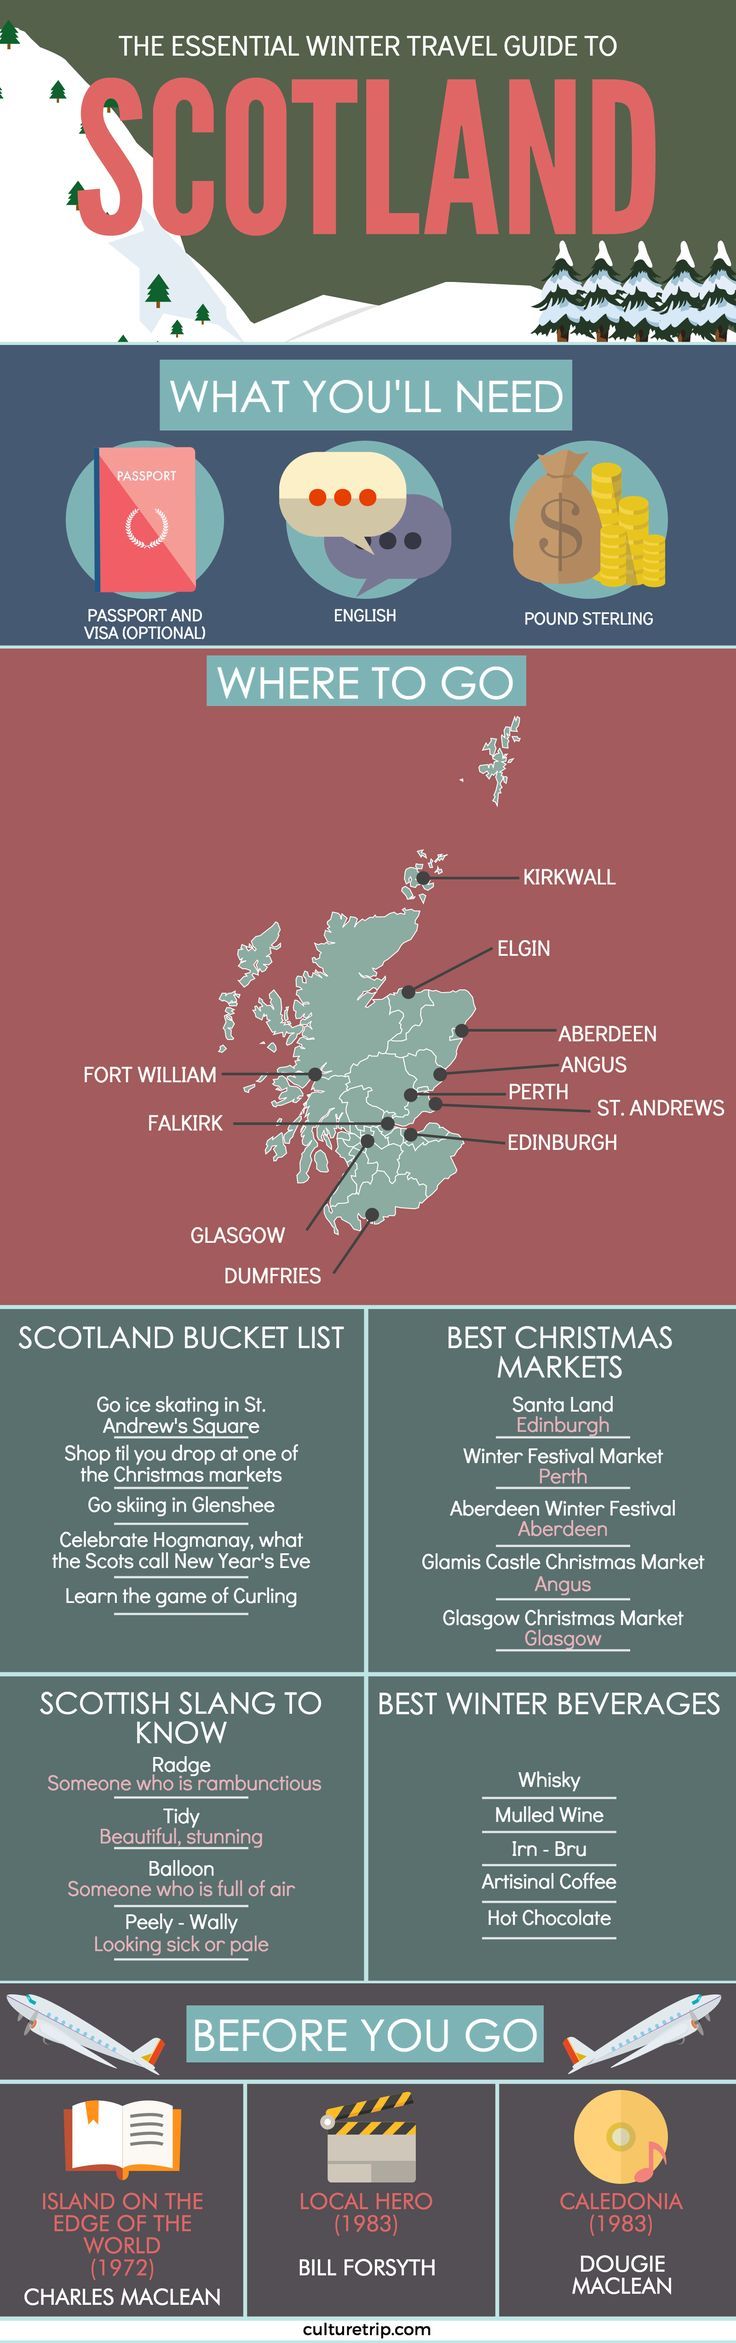 The Scotland Winter Travel Guide (Infographic)